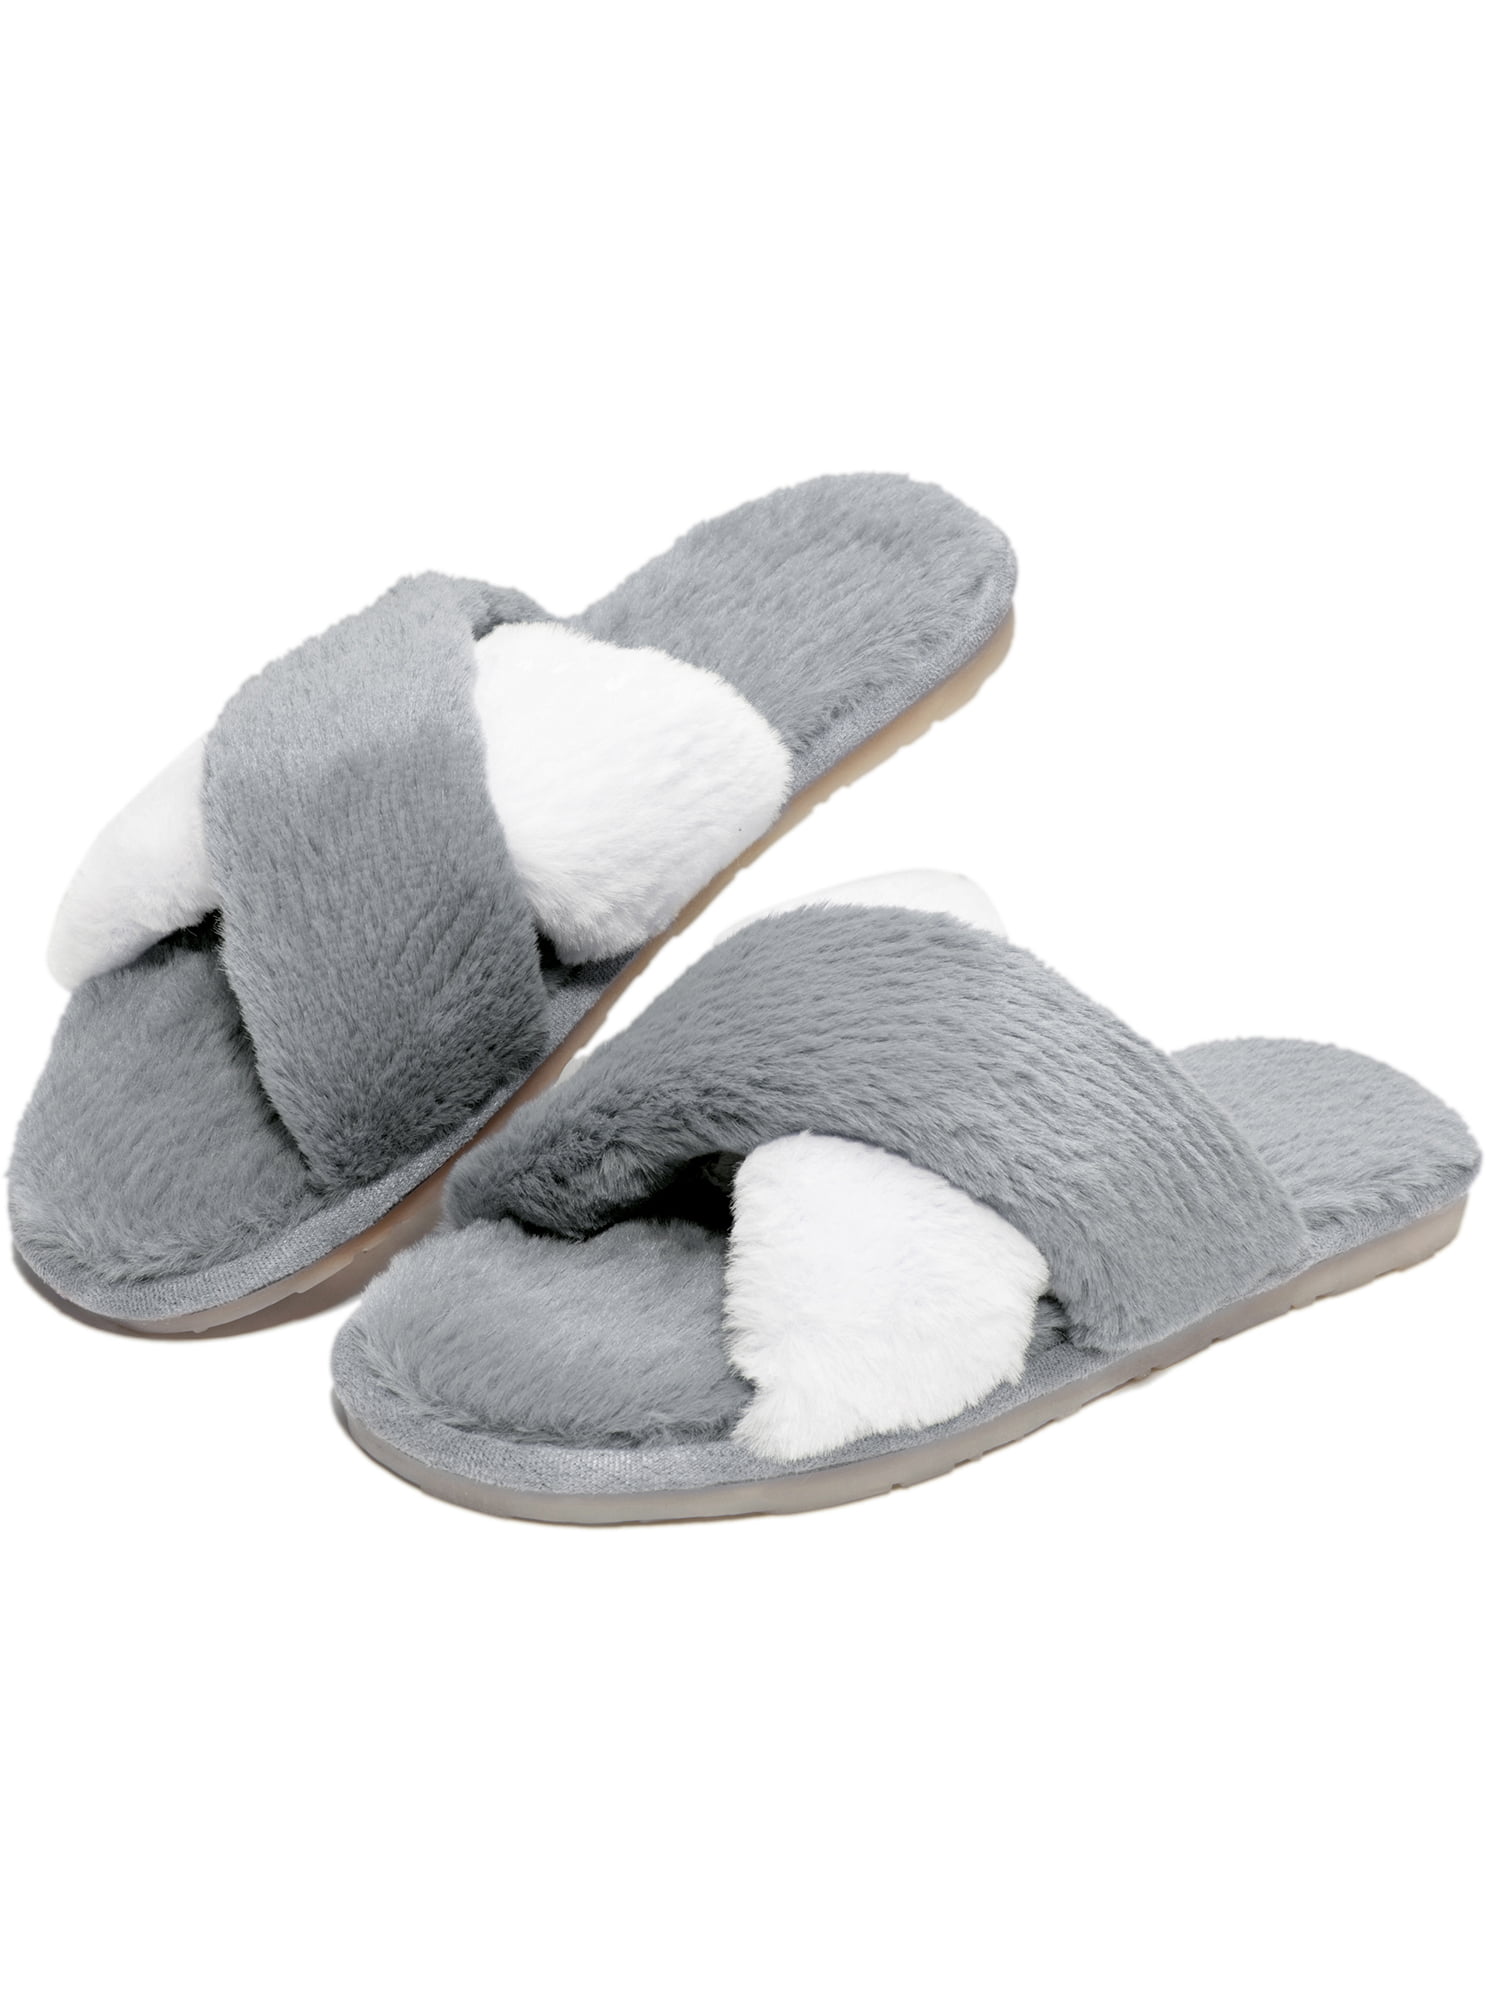 Aerusi Women Soft Plush Fuzzy Thong Spa Slippers Memory Foam House Indoor Shoes